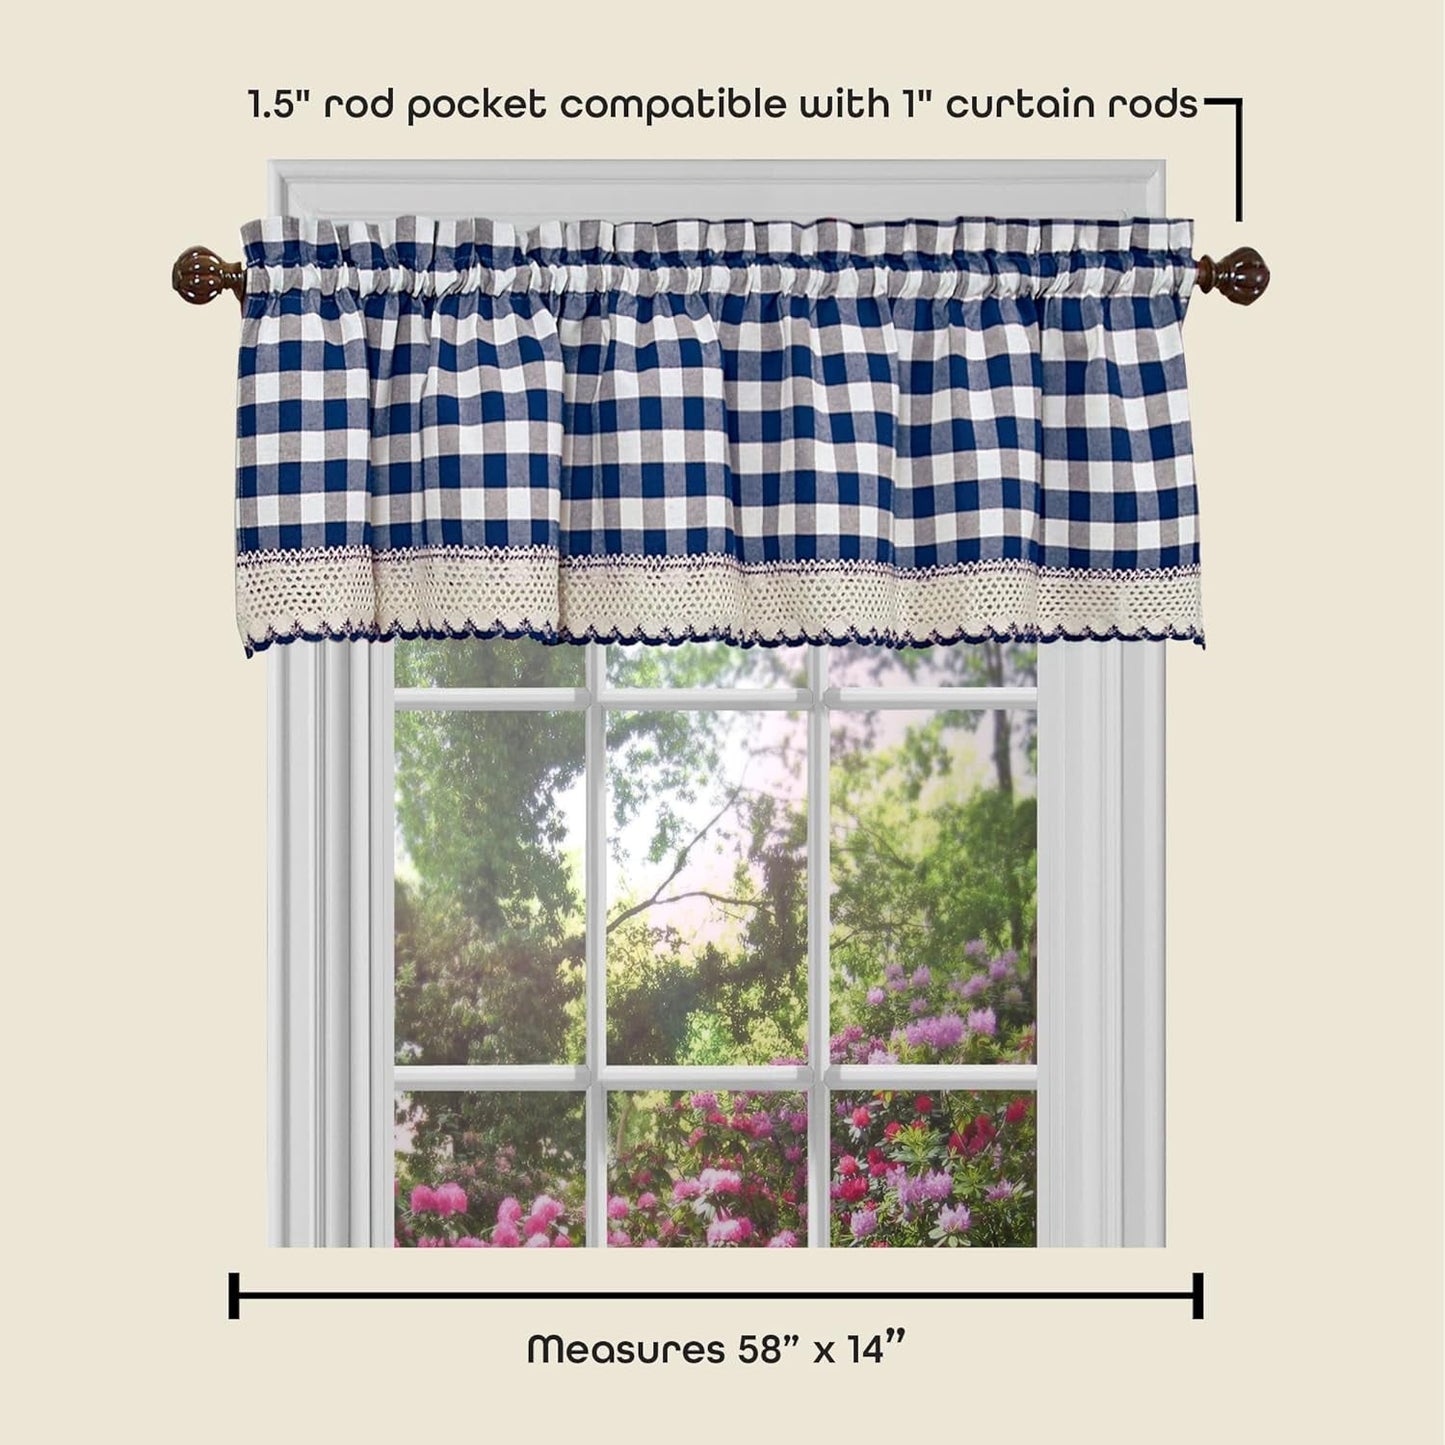 Buffalo Check Valance Window Curtains - 58 Inch Width, 14 Inch Length - Navy Blue & Ivory White Plaid - Light Filtering Farmhouse Country Drapes for Bedroom Living & Dining Room by Achim Home Decor